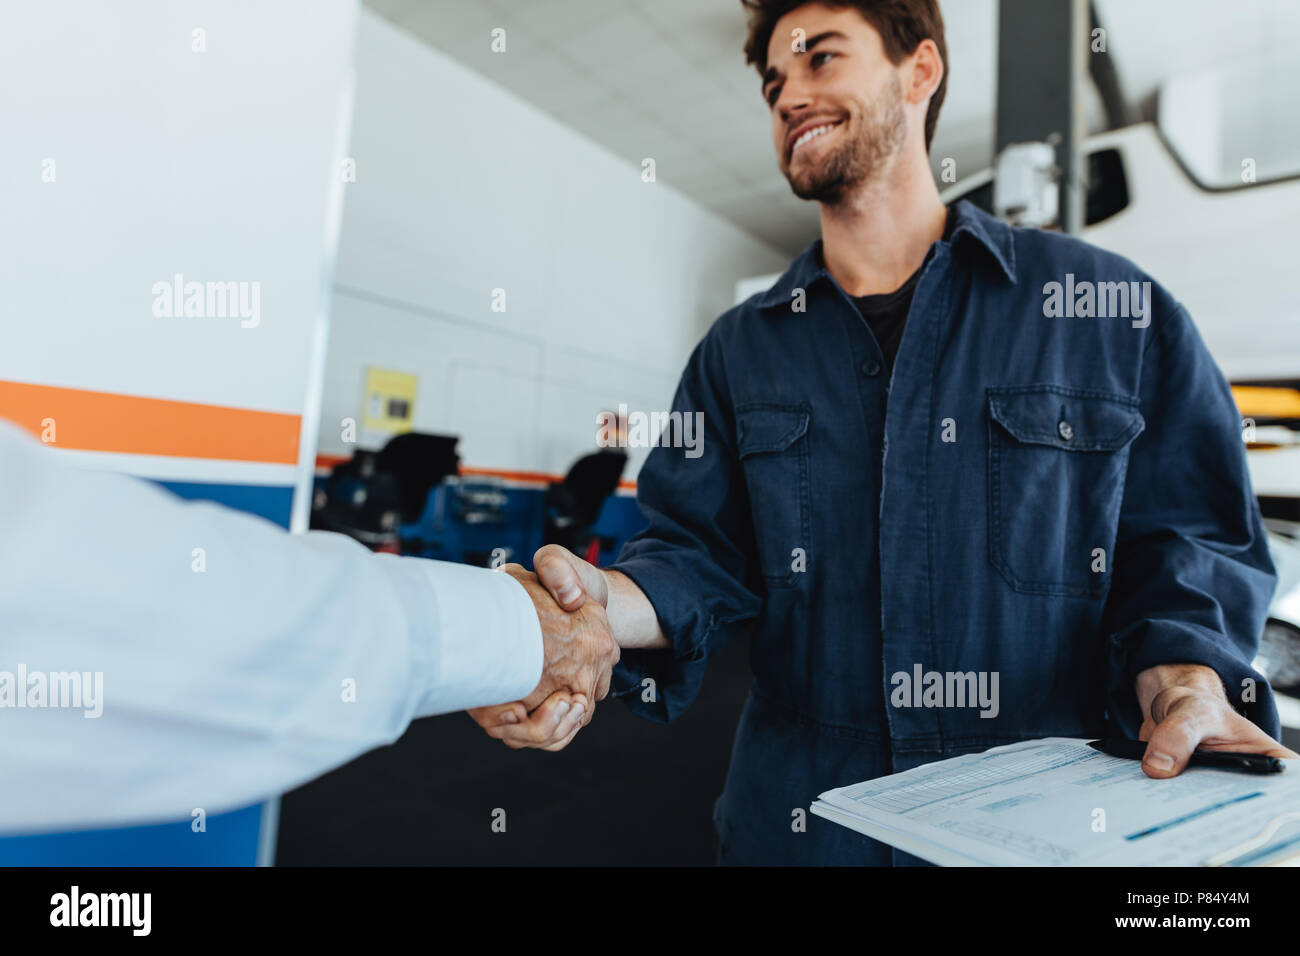 Young auto mechanic shaking hands with satisfied customer in garage. Automobile service center worker shaking hands with client after car servicing. Stock Photo